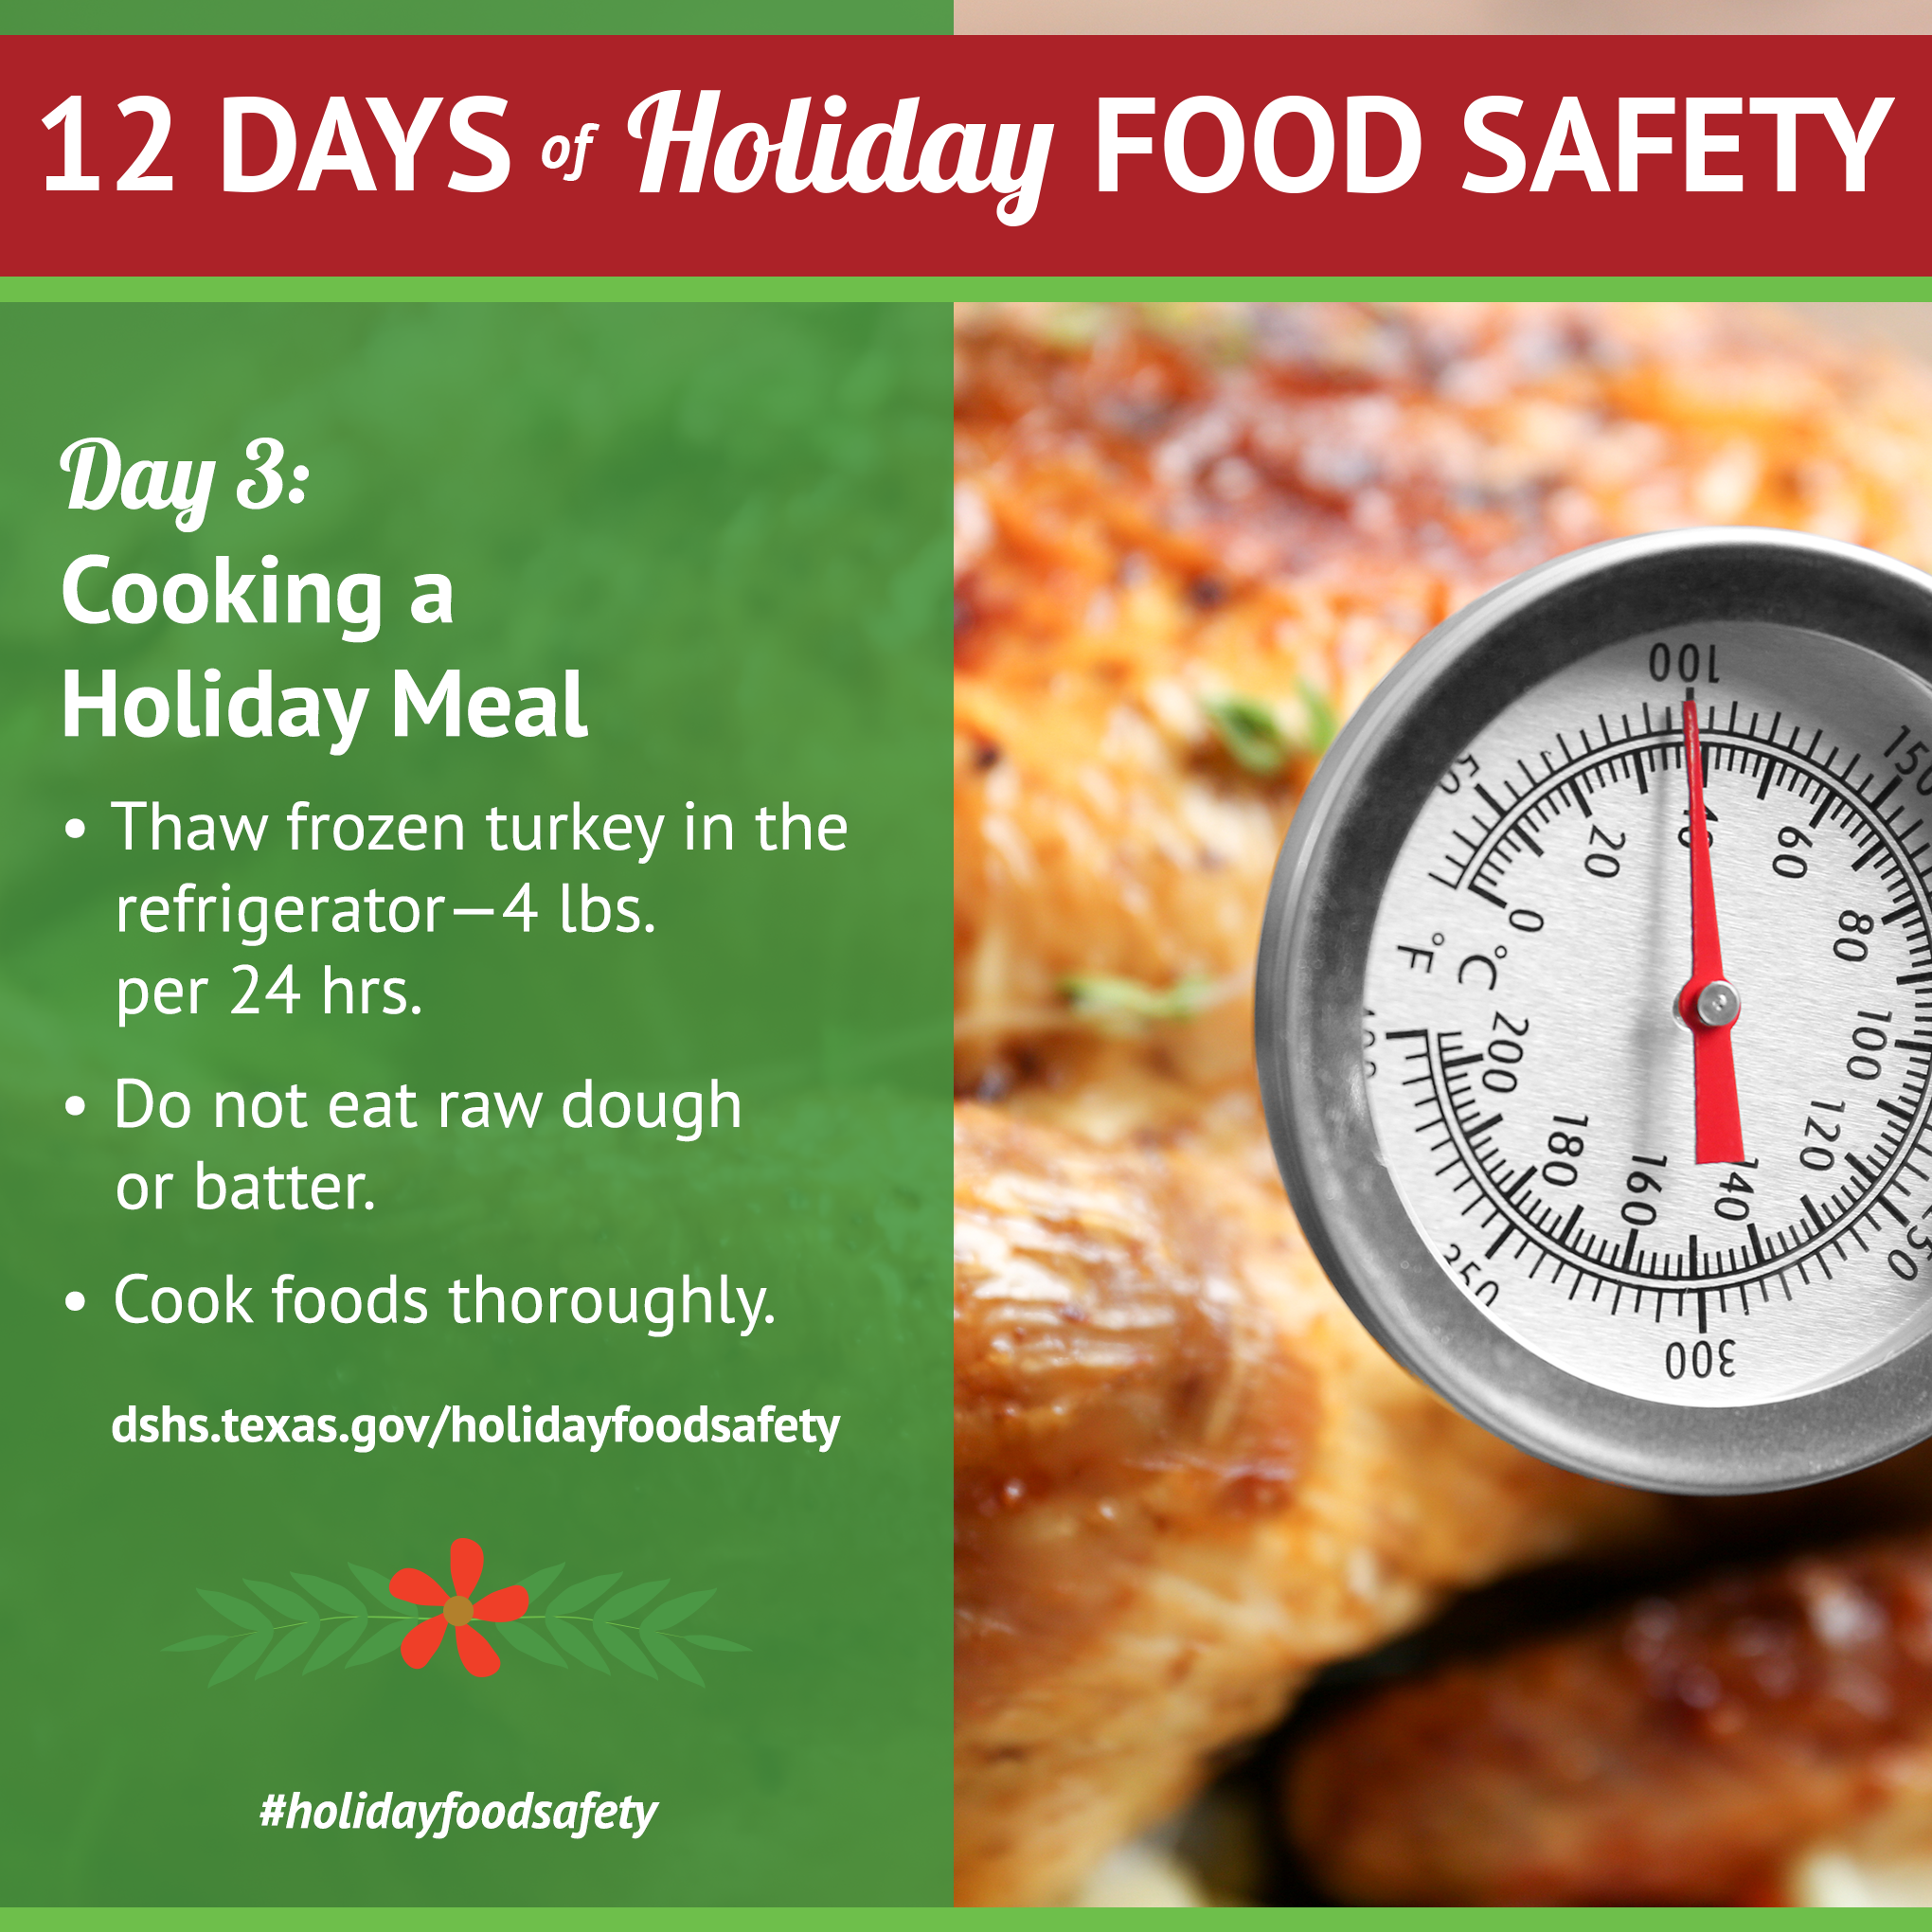 https://www.dshs.texas.gov/sites/default/files/uploadedImages/Content/Consumer_and_External_Affairs/campaigns/holidayfoodsafety/images/day3-holiday-food-safety.png